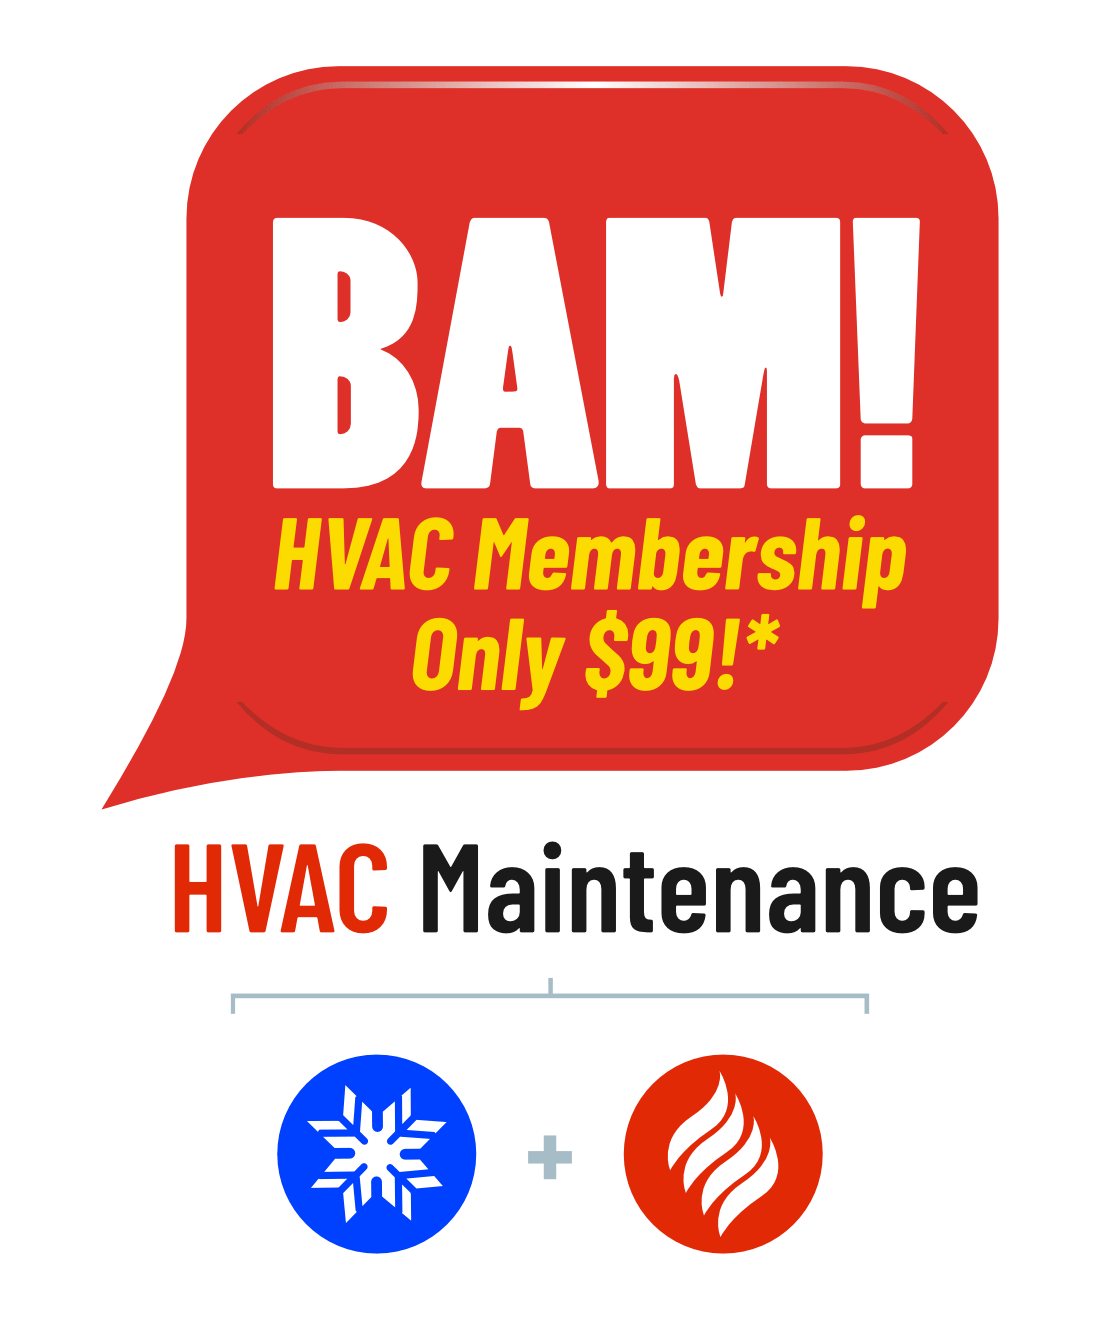 <span class="bundle-title">BAM</span><span class="bundle-price">$99.00 / $89.00<em><br />(Regular Price / Combo Price) <br />(per system)</em></span><span class="bundle-description">Includes 1 Heating and 1 Cooling inspection. Per year, <strong>per system.</strong></span><span class="bundle-btn hidden-xs">Click to Add »</span><span class="bundle-btn visible-xs">Tap to Add »</span>